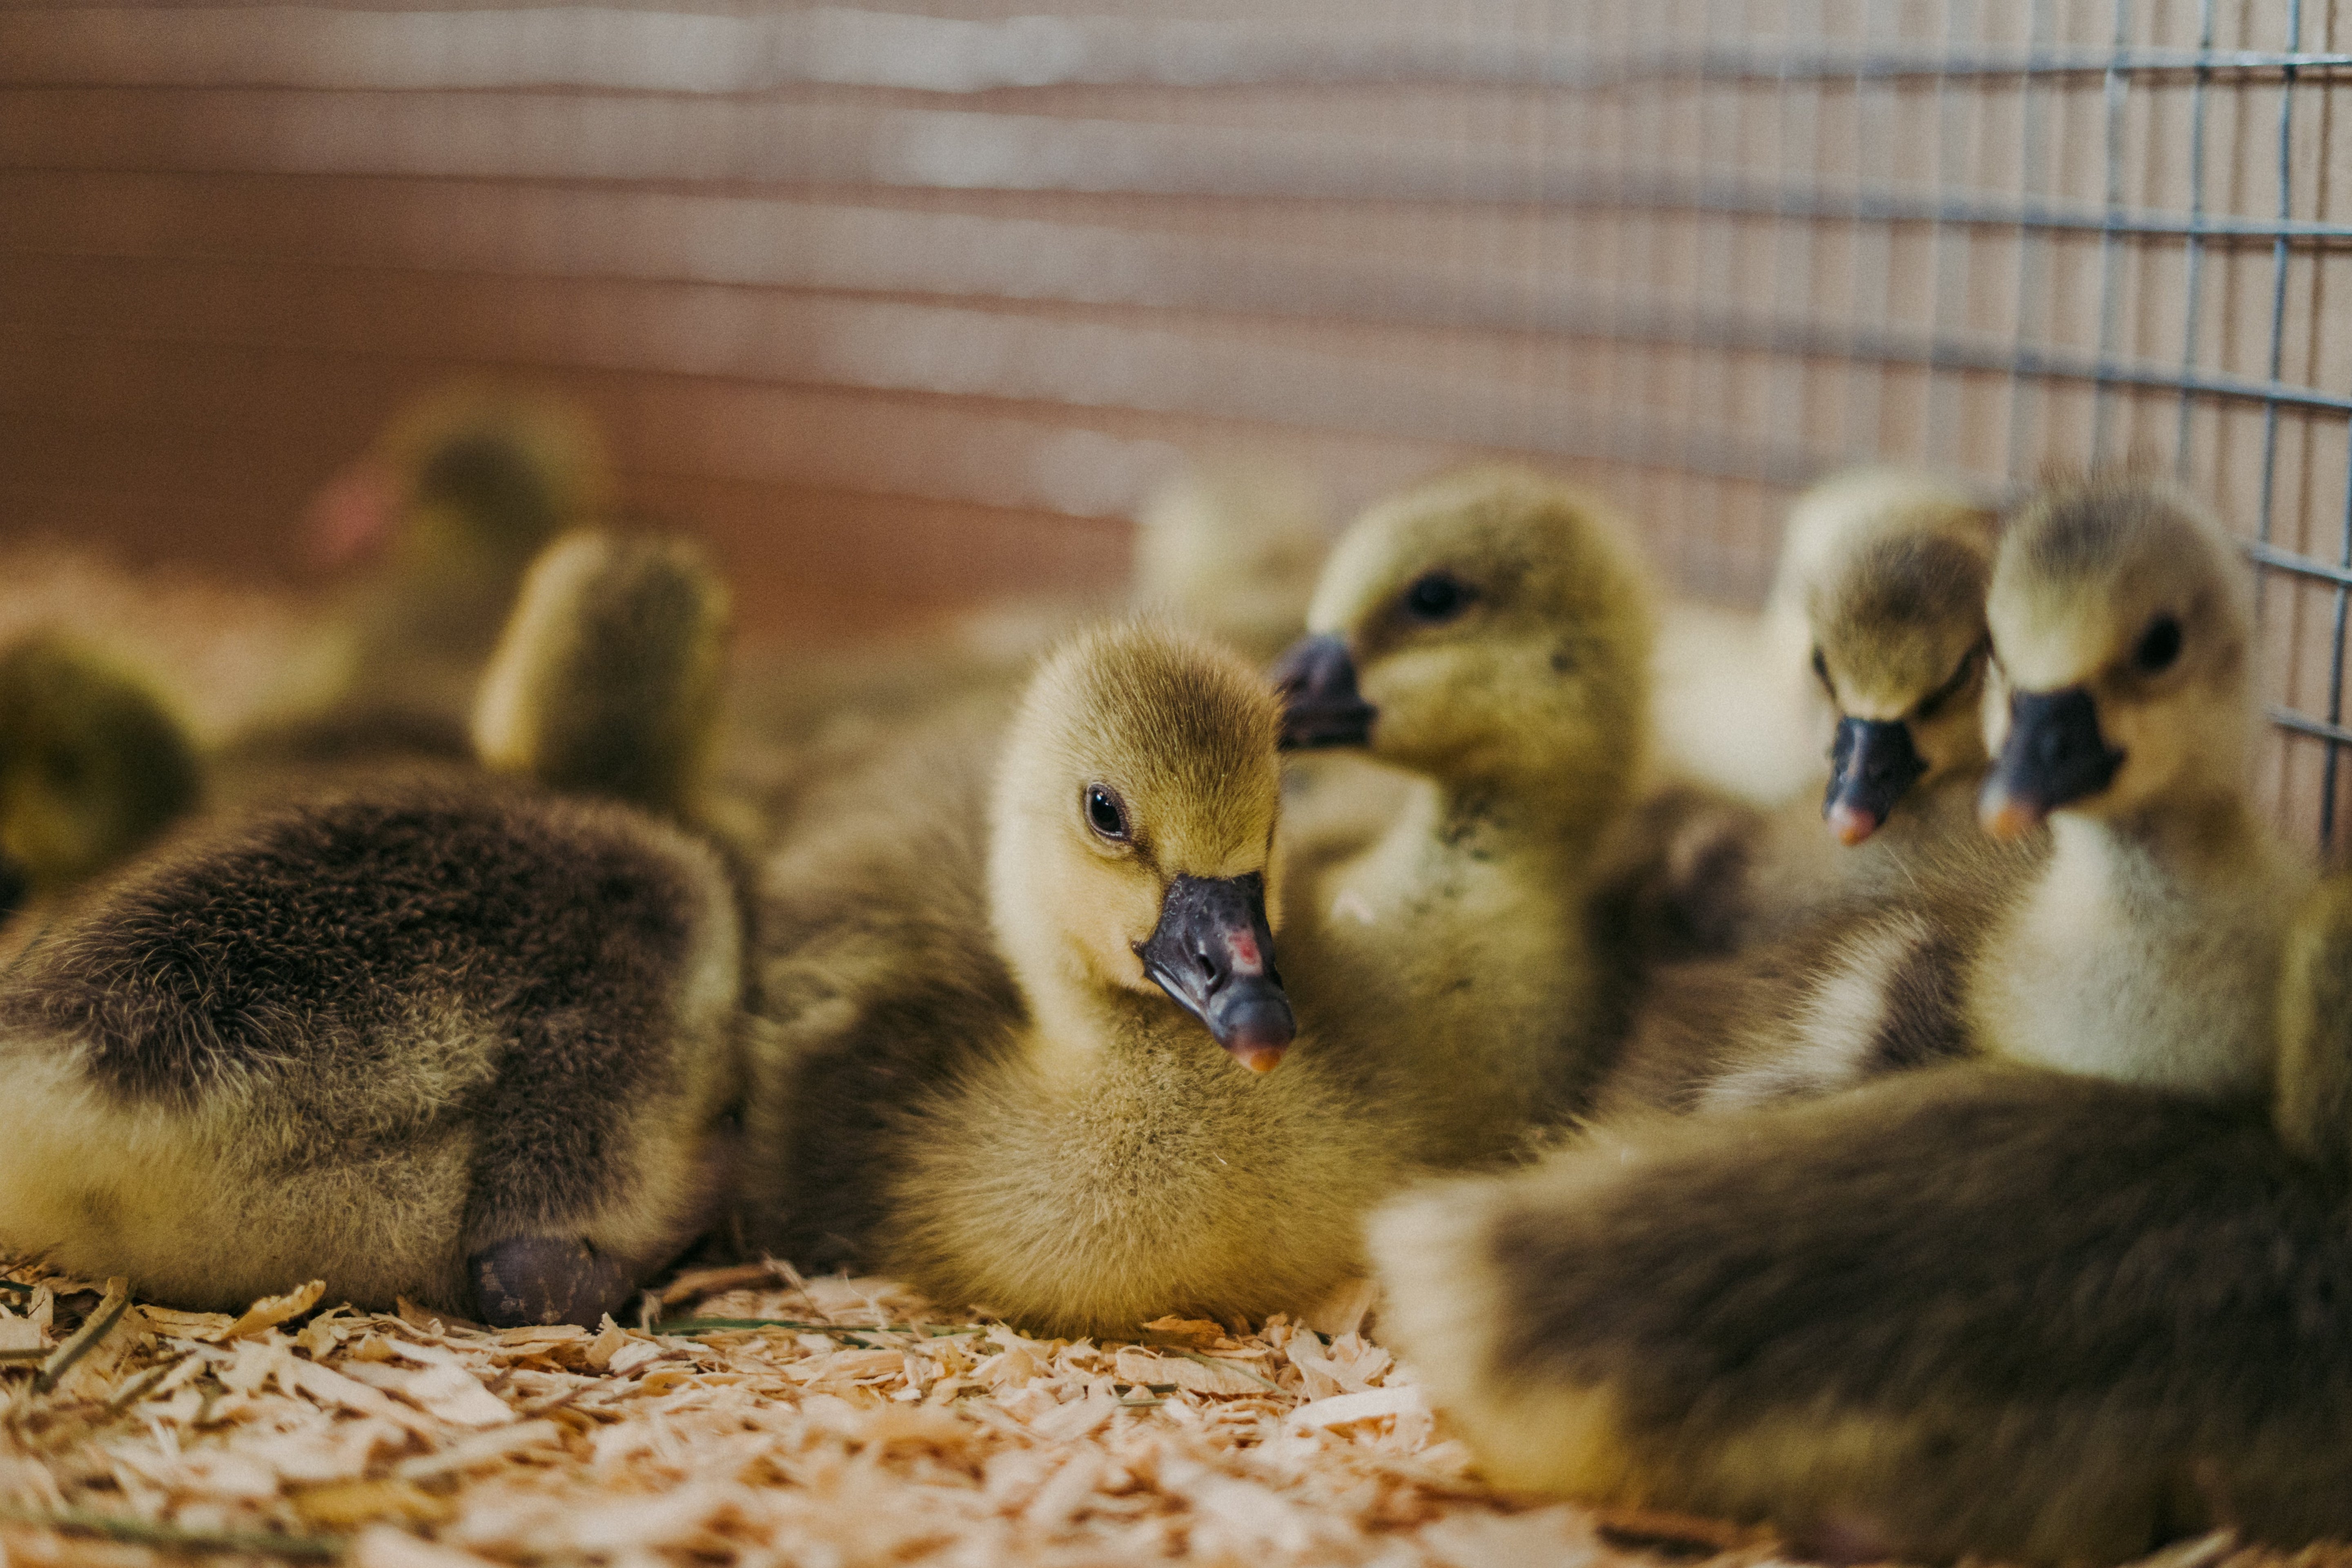 Visit on a goose farm with the theme: Goslings!